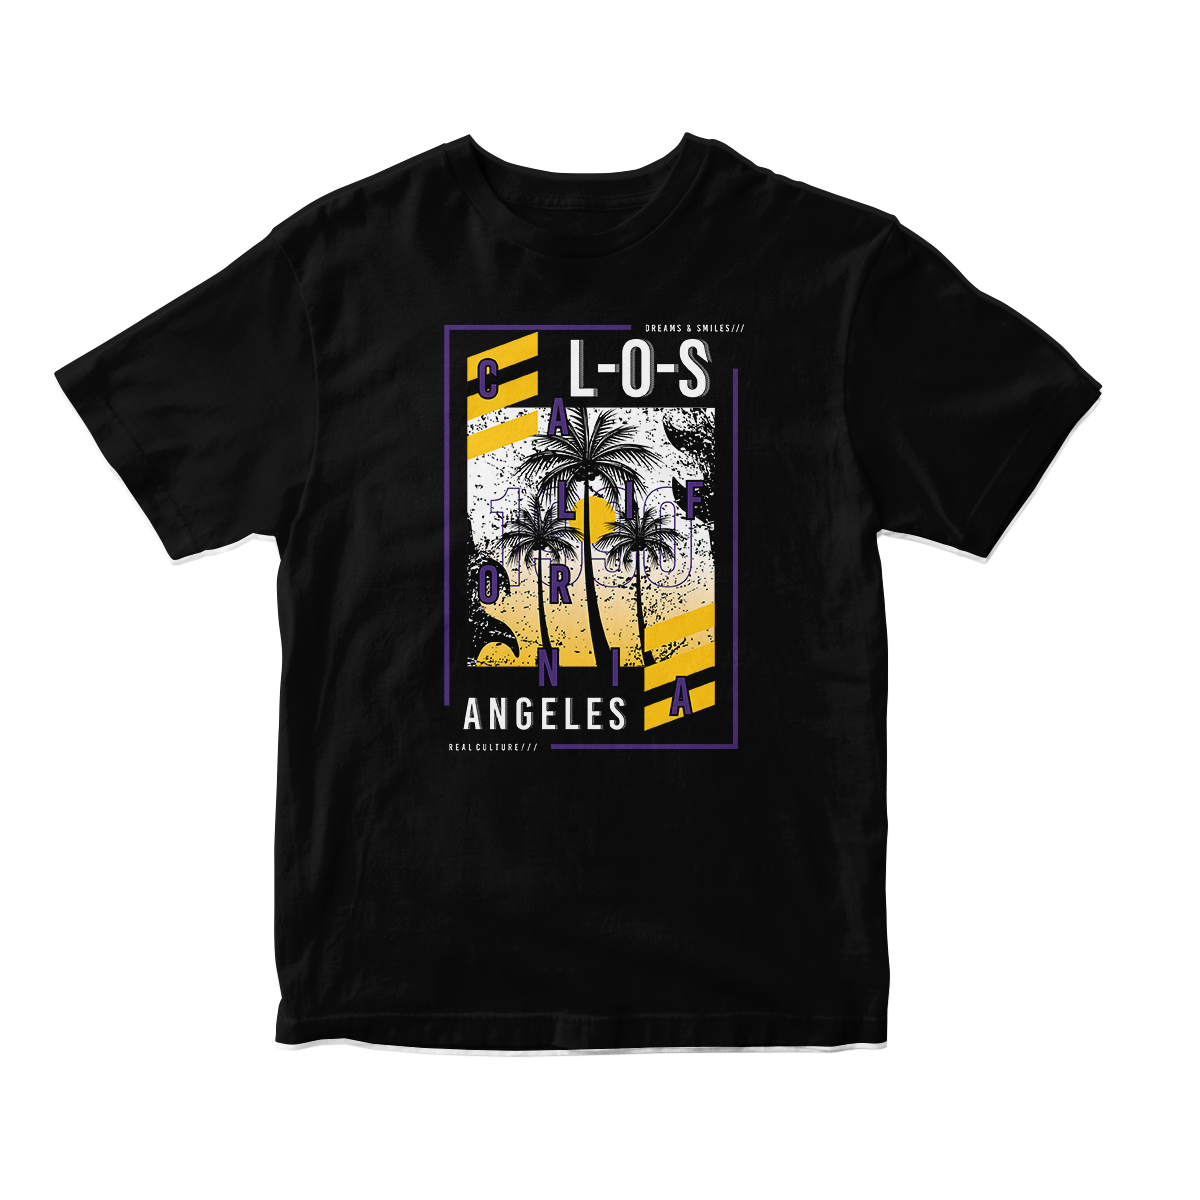 'Cali Culture' in Lakers CW Short Sleeve Tee